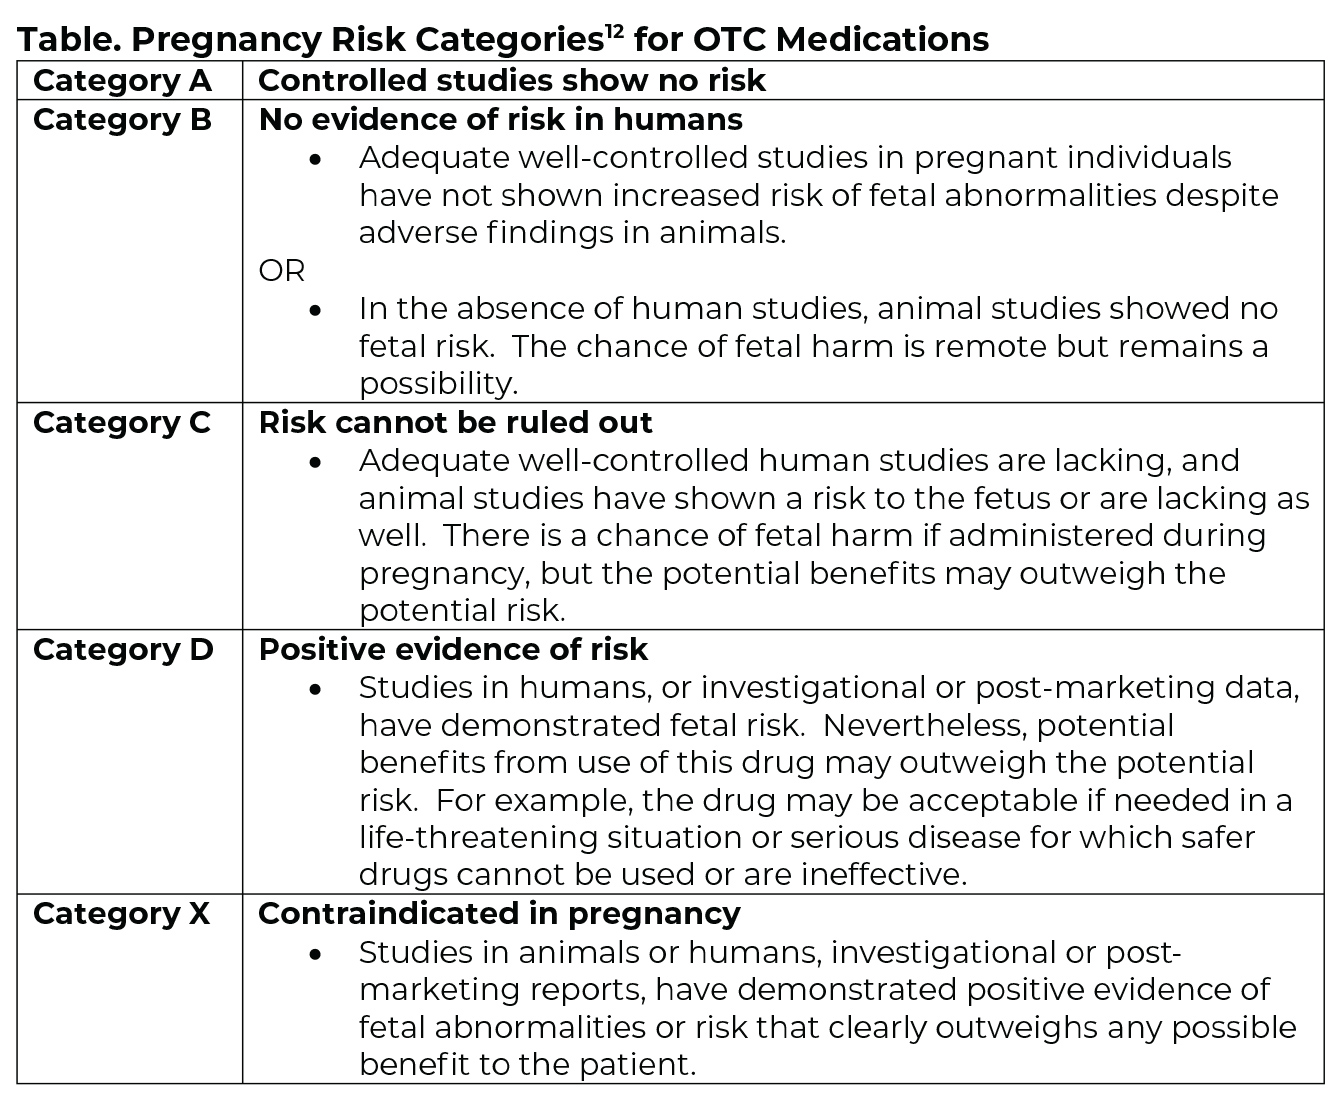 An image of Table. Pregnancy Risk Categories12 for OTC Medications.